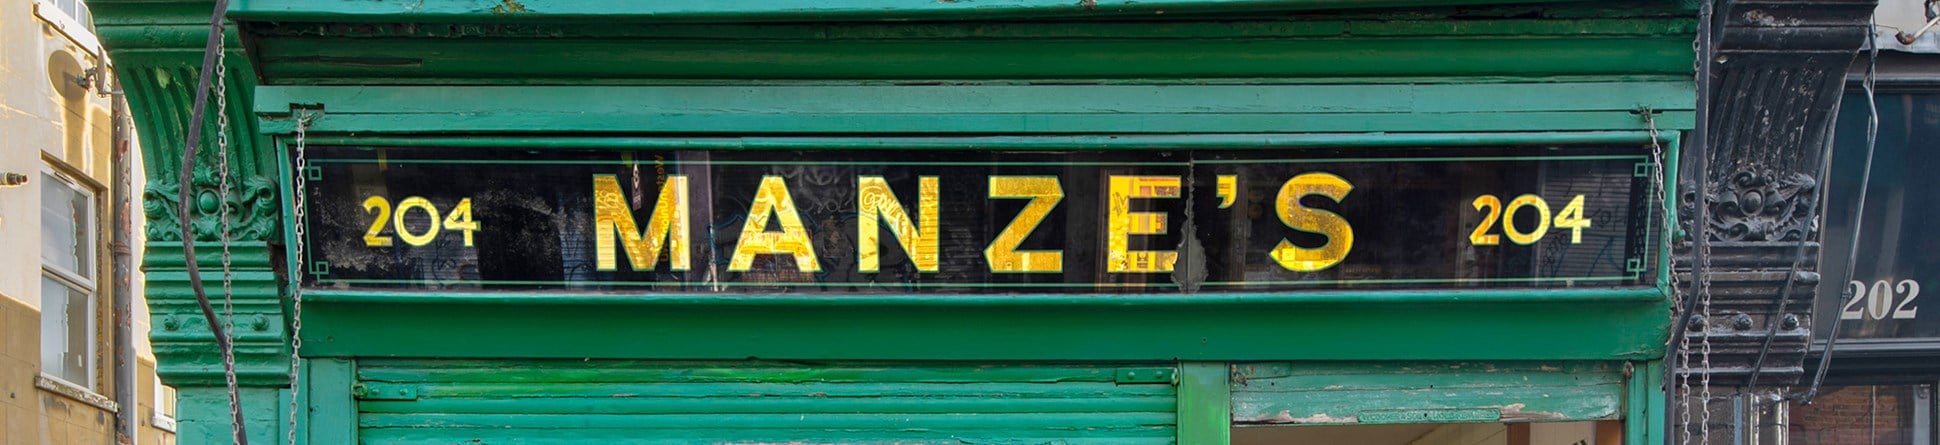 A green shop front with a sign saying "204, Manze's, 204; Meal in a moment, Manze's Meat Pies, all made daily".